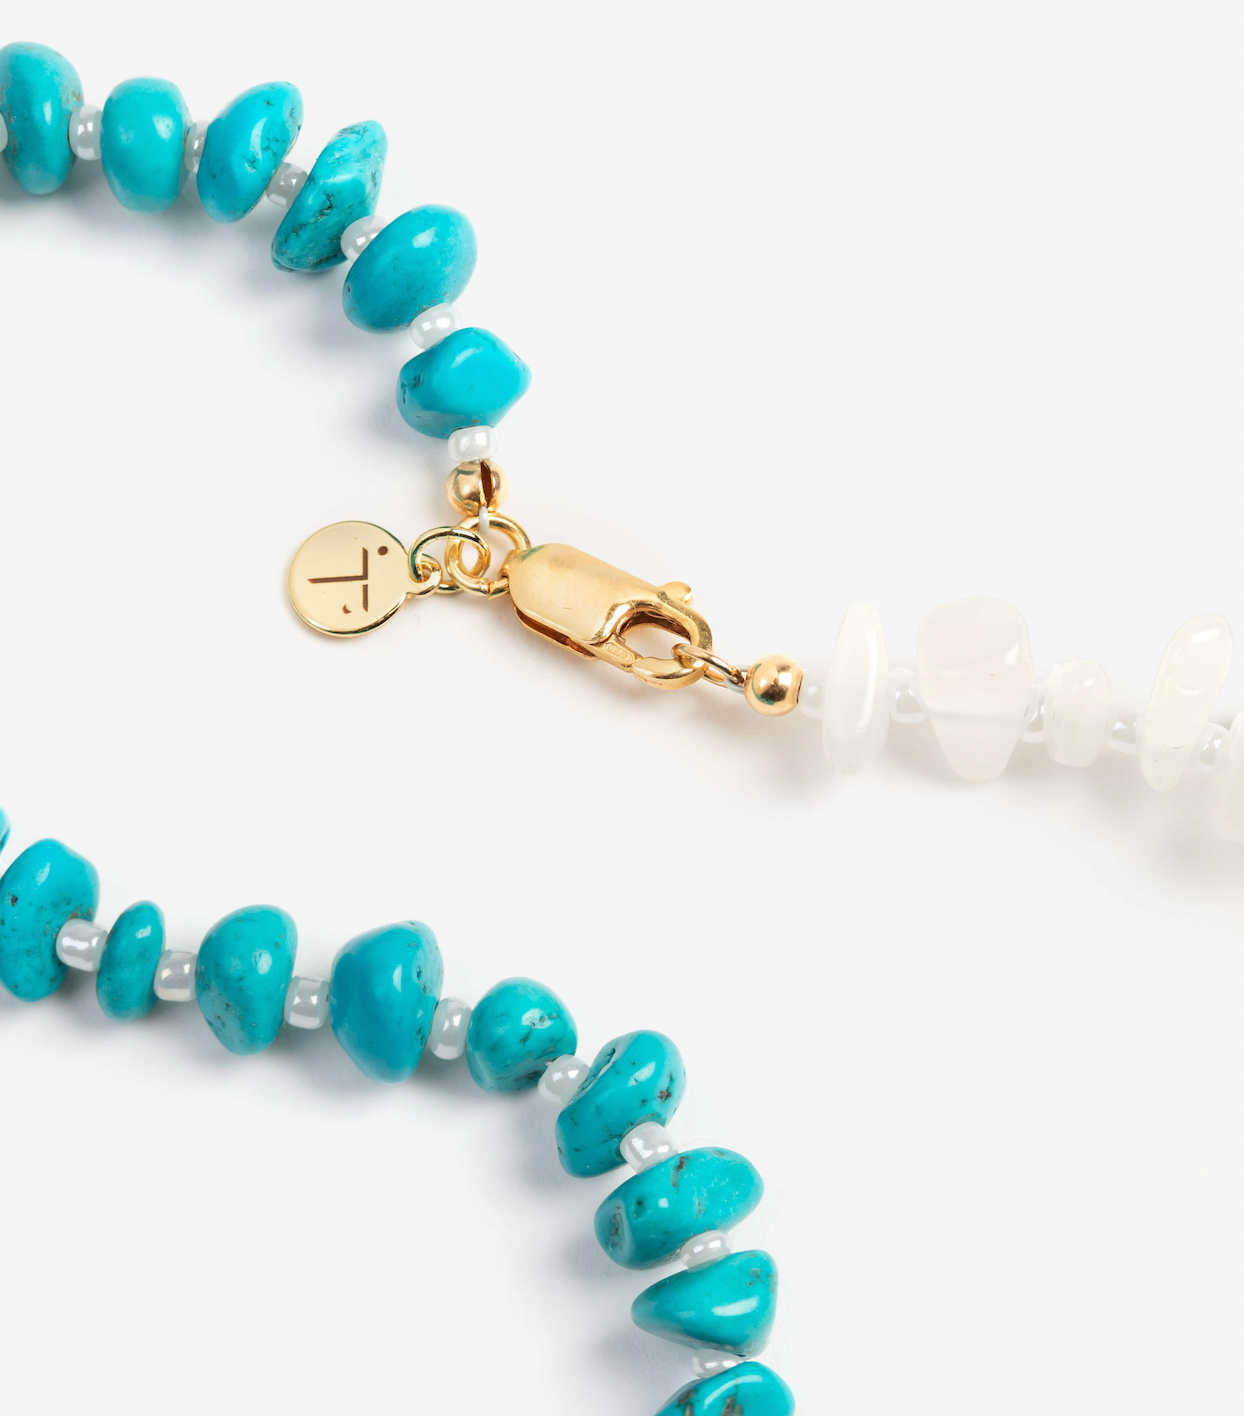 FLOW Moonstone & Turquoise Crystal Healing Necklace